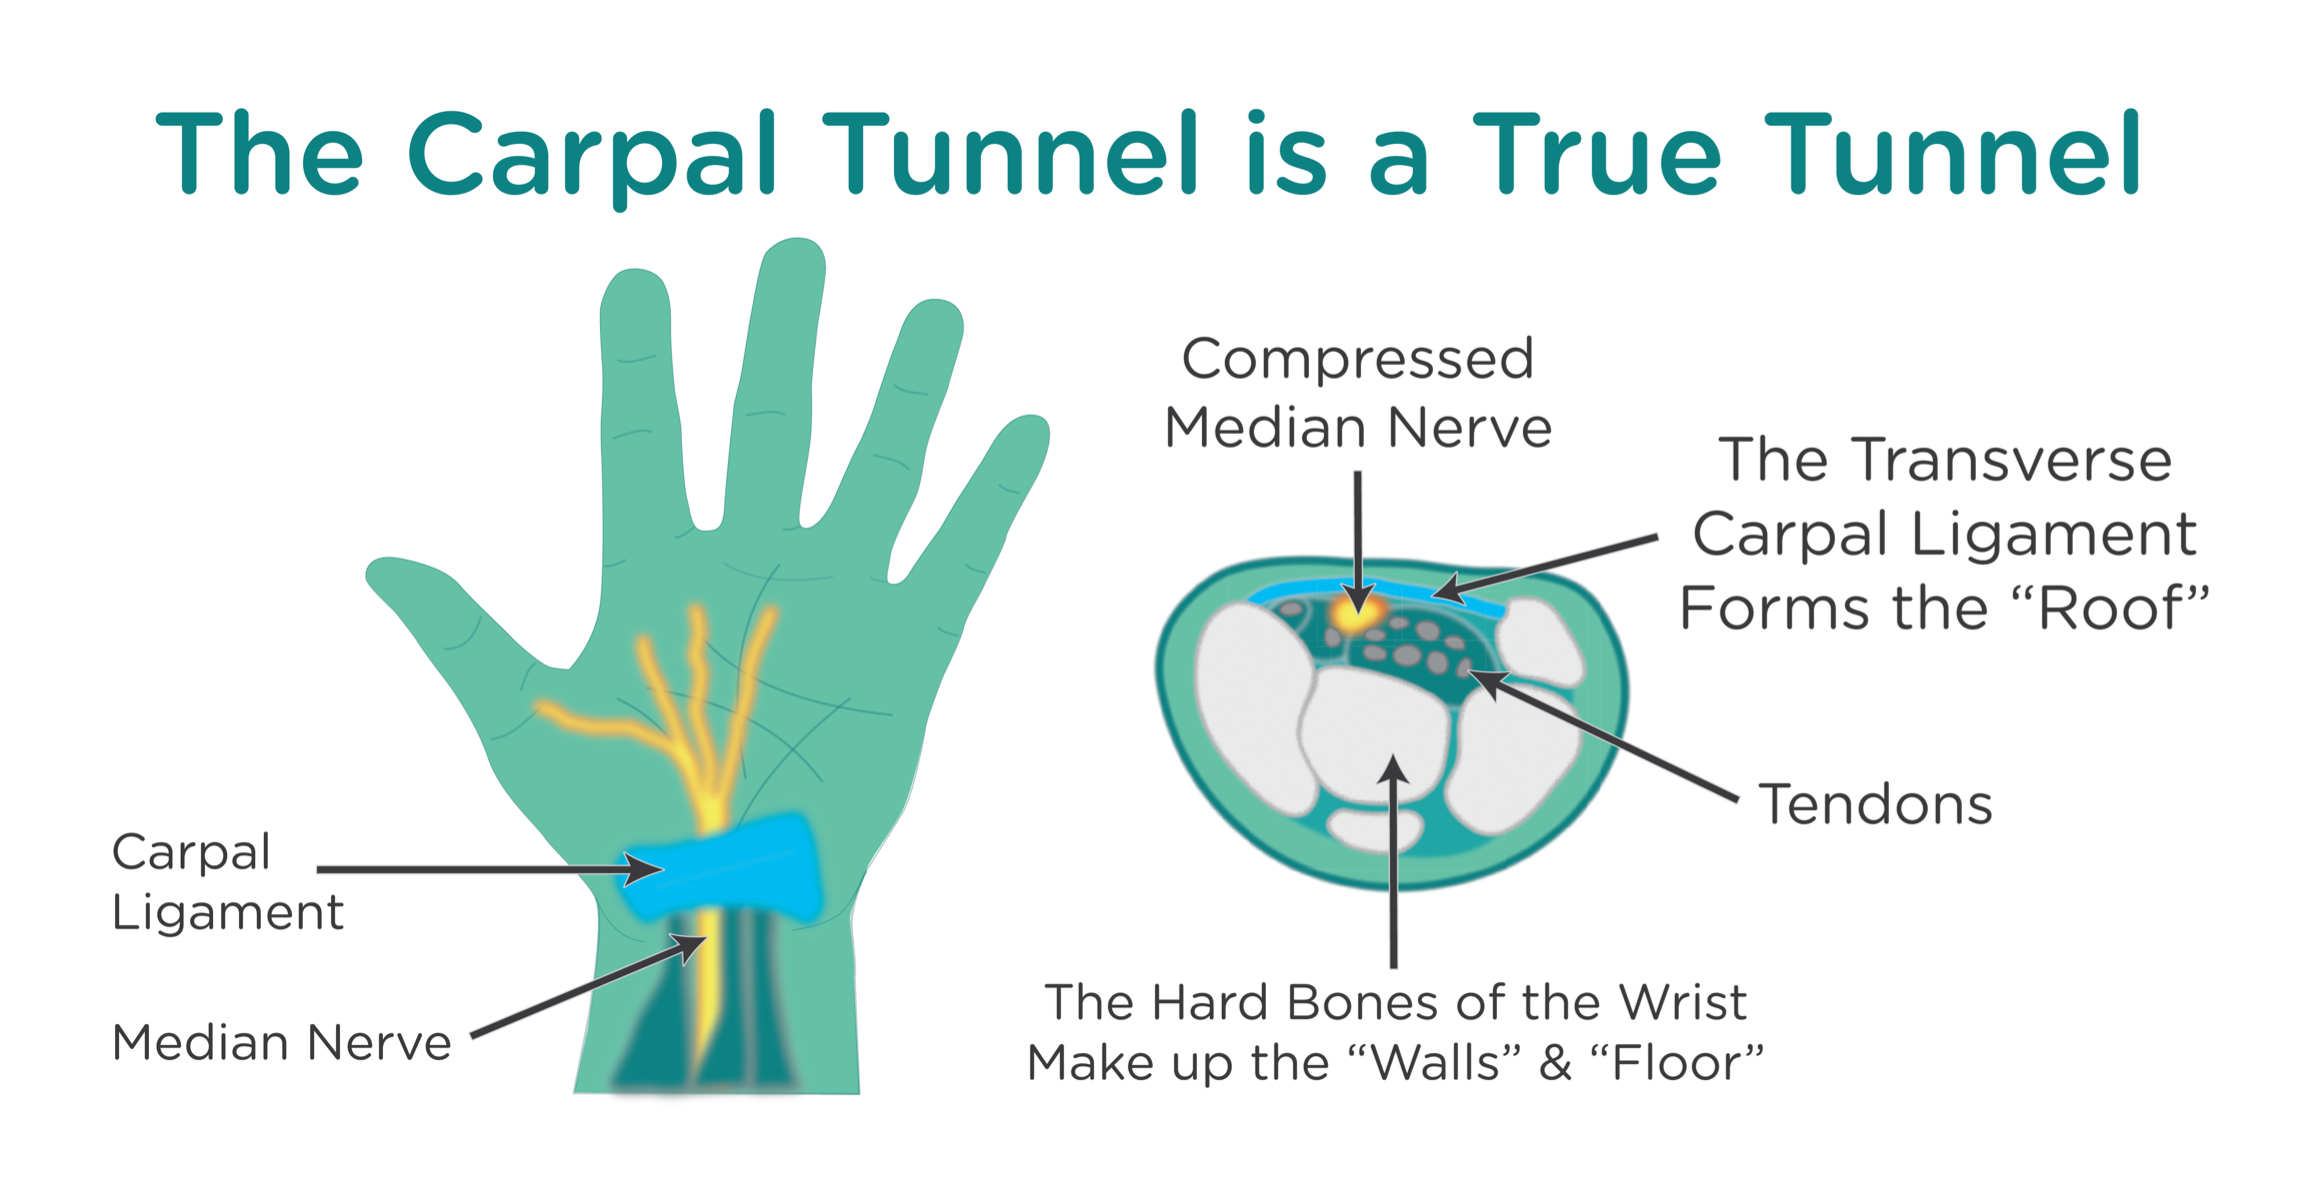 Diagram displaying the anatomy of the Carpal Tunnel.